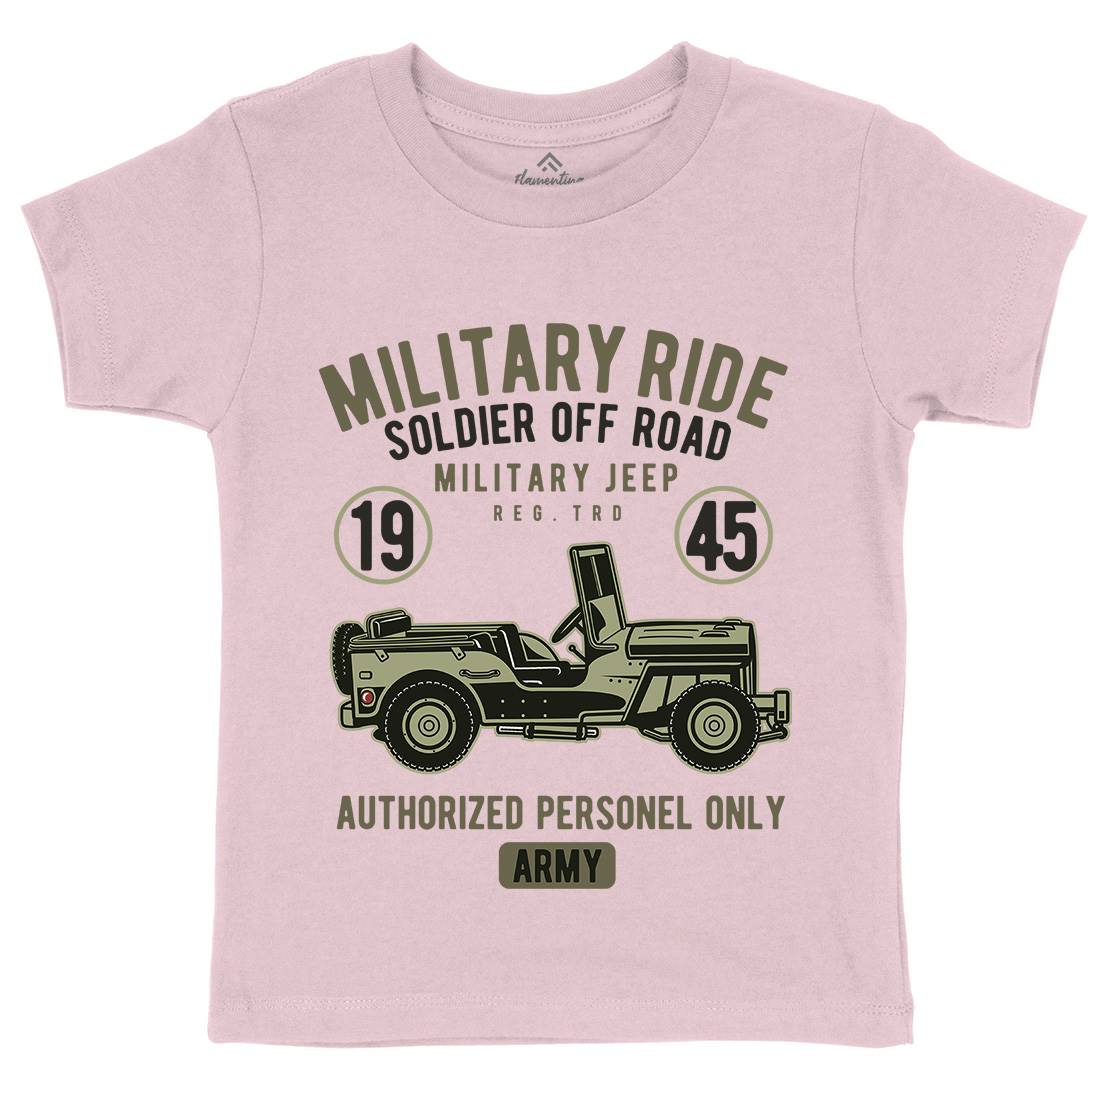 Military Ride Kids Crew Neck T-Shirt Army D549